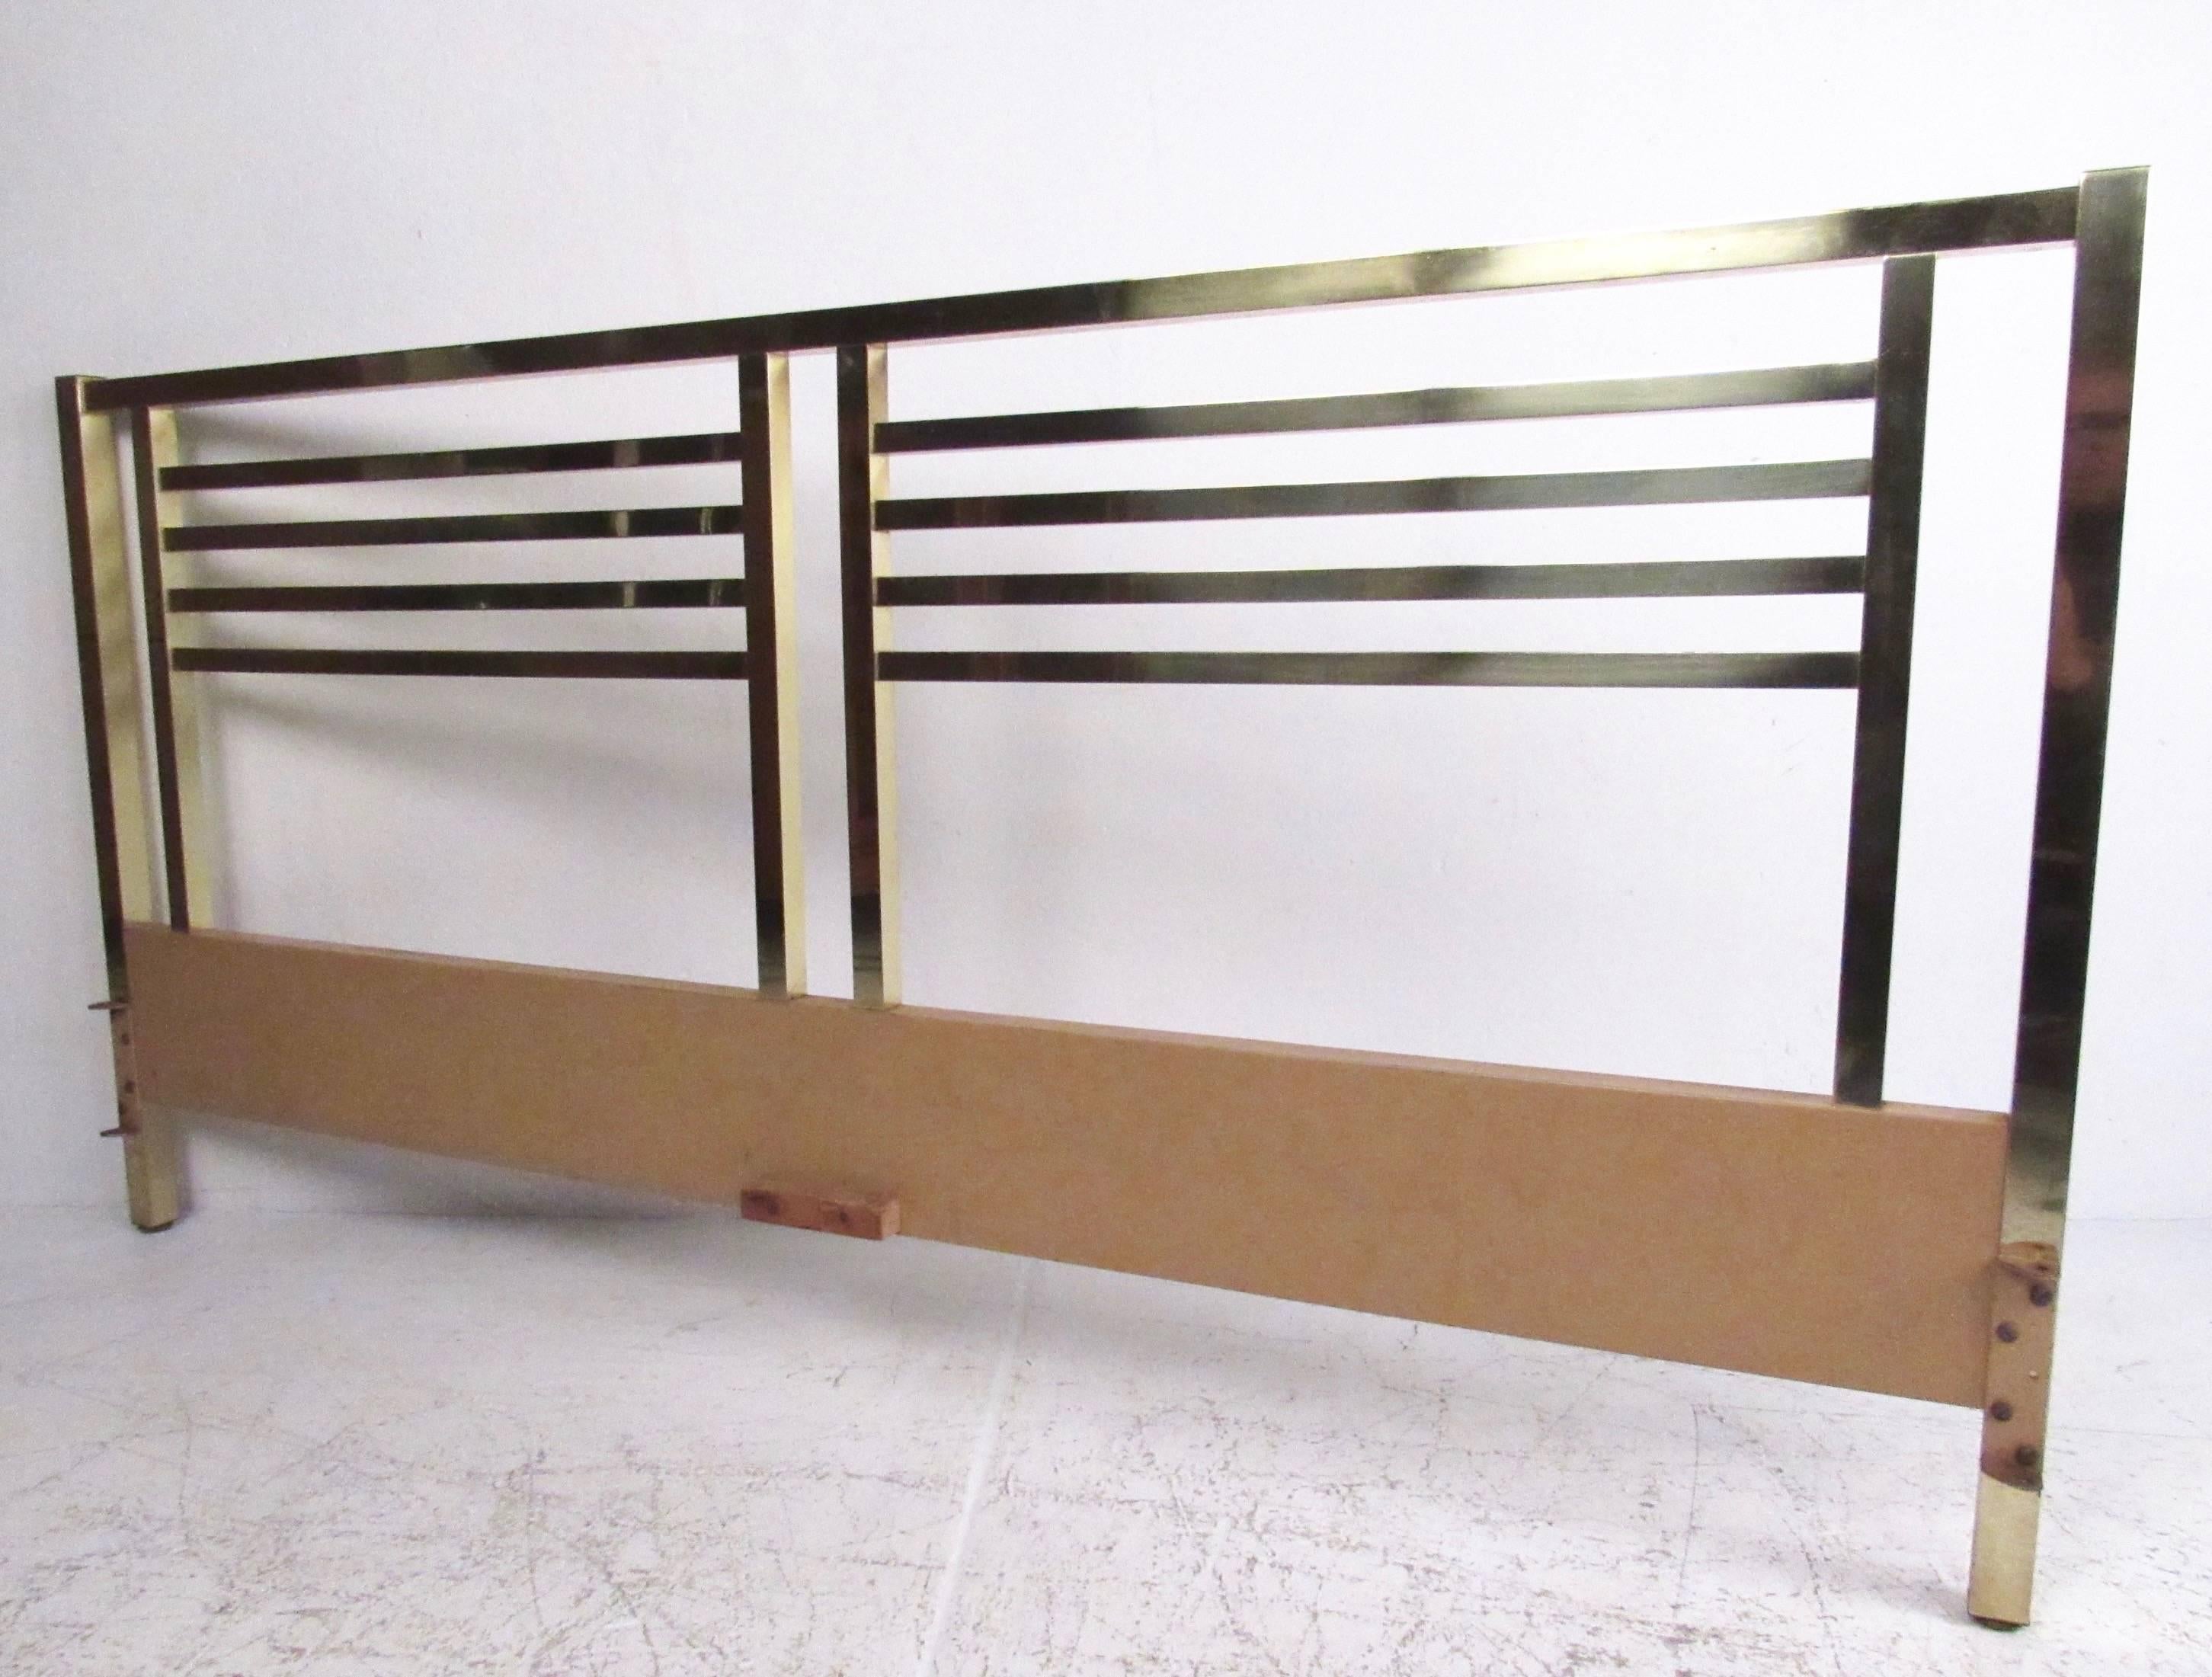 This unique brass headboard features stylish Mid-Century Modern design and measures 78 inches wide. Unique patina adds to the vintage appeal of the piece, making it a great addition to any interior. Please confirm item location (NY or NJ).